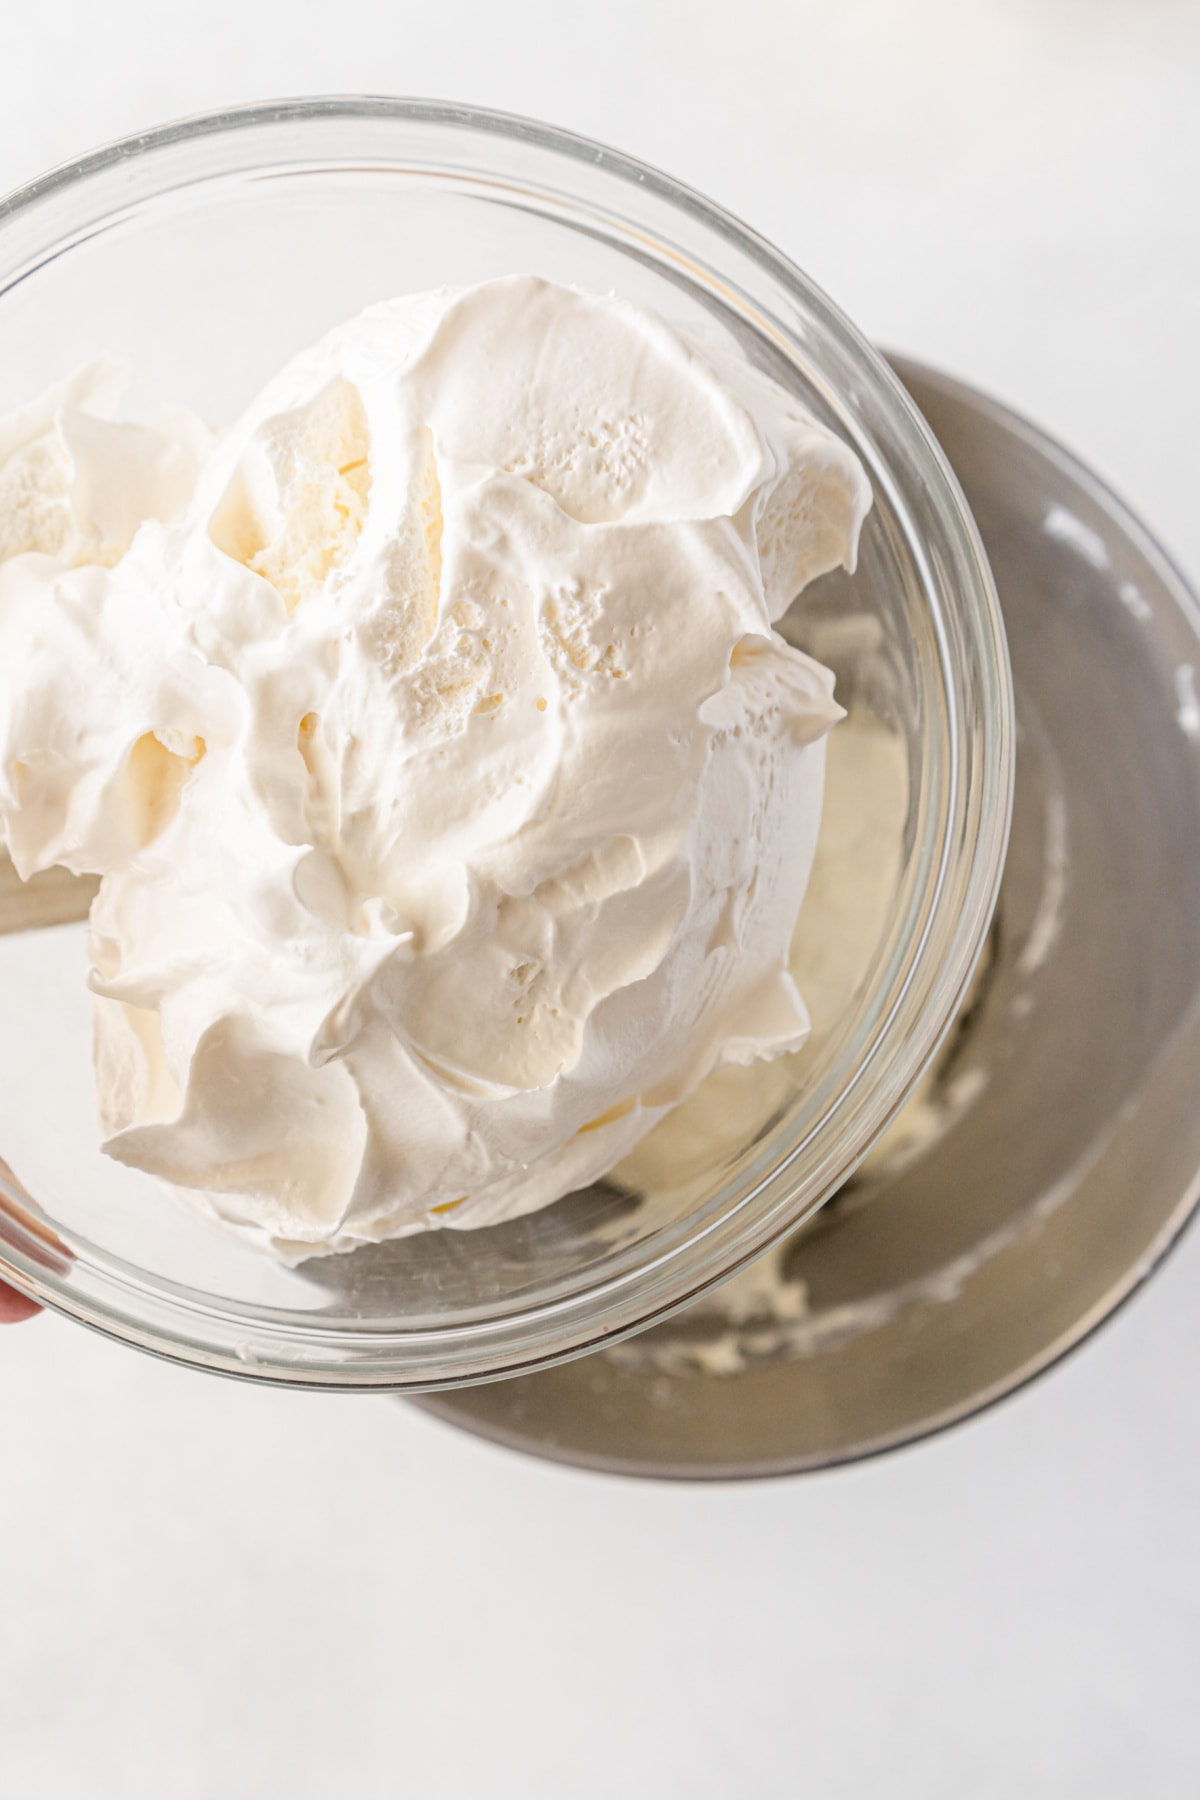 Cool whip in bowl for recipe